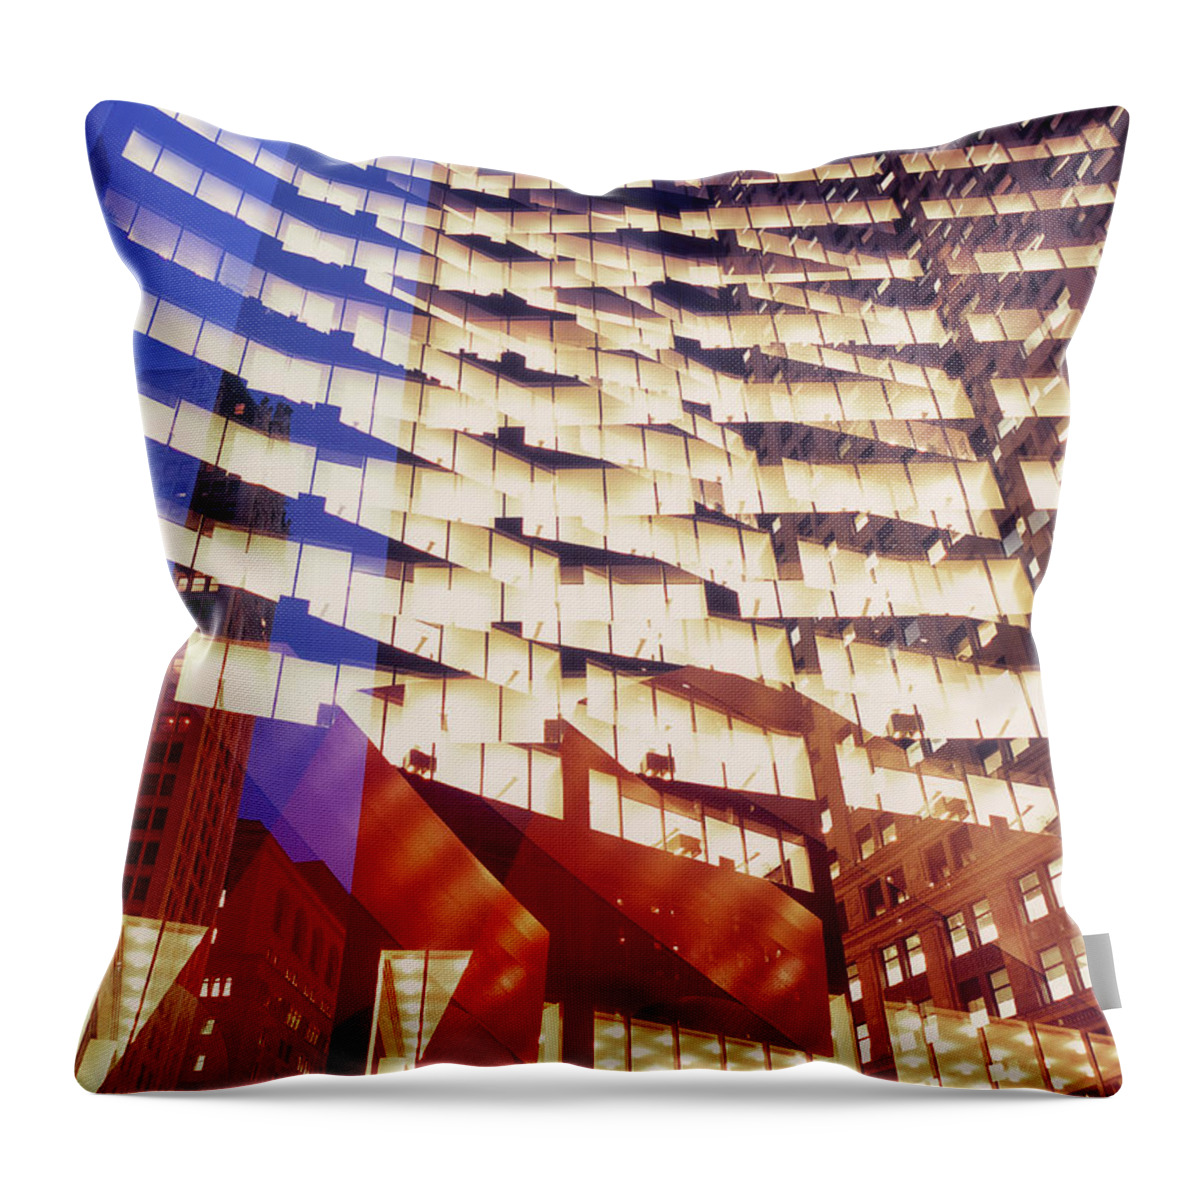 Outdoors Throw Pillow featuring the photograph Multiple Exposure Image Of Large Office by Eschcollection